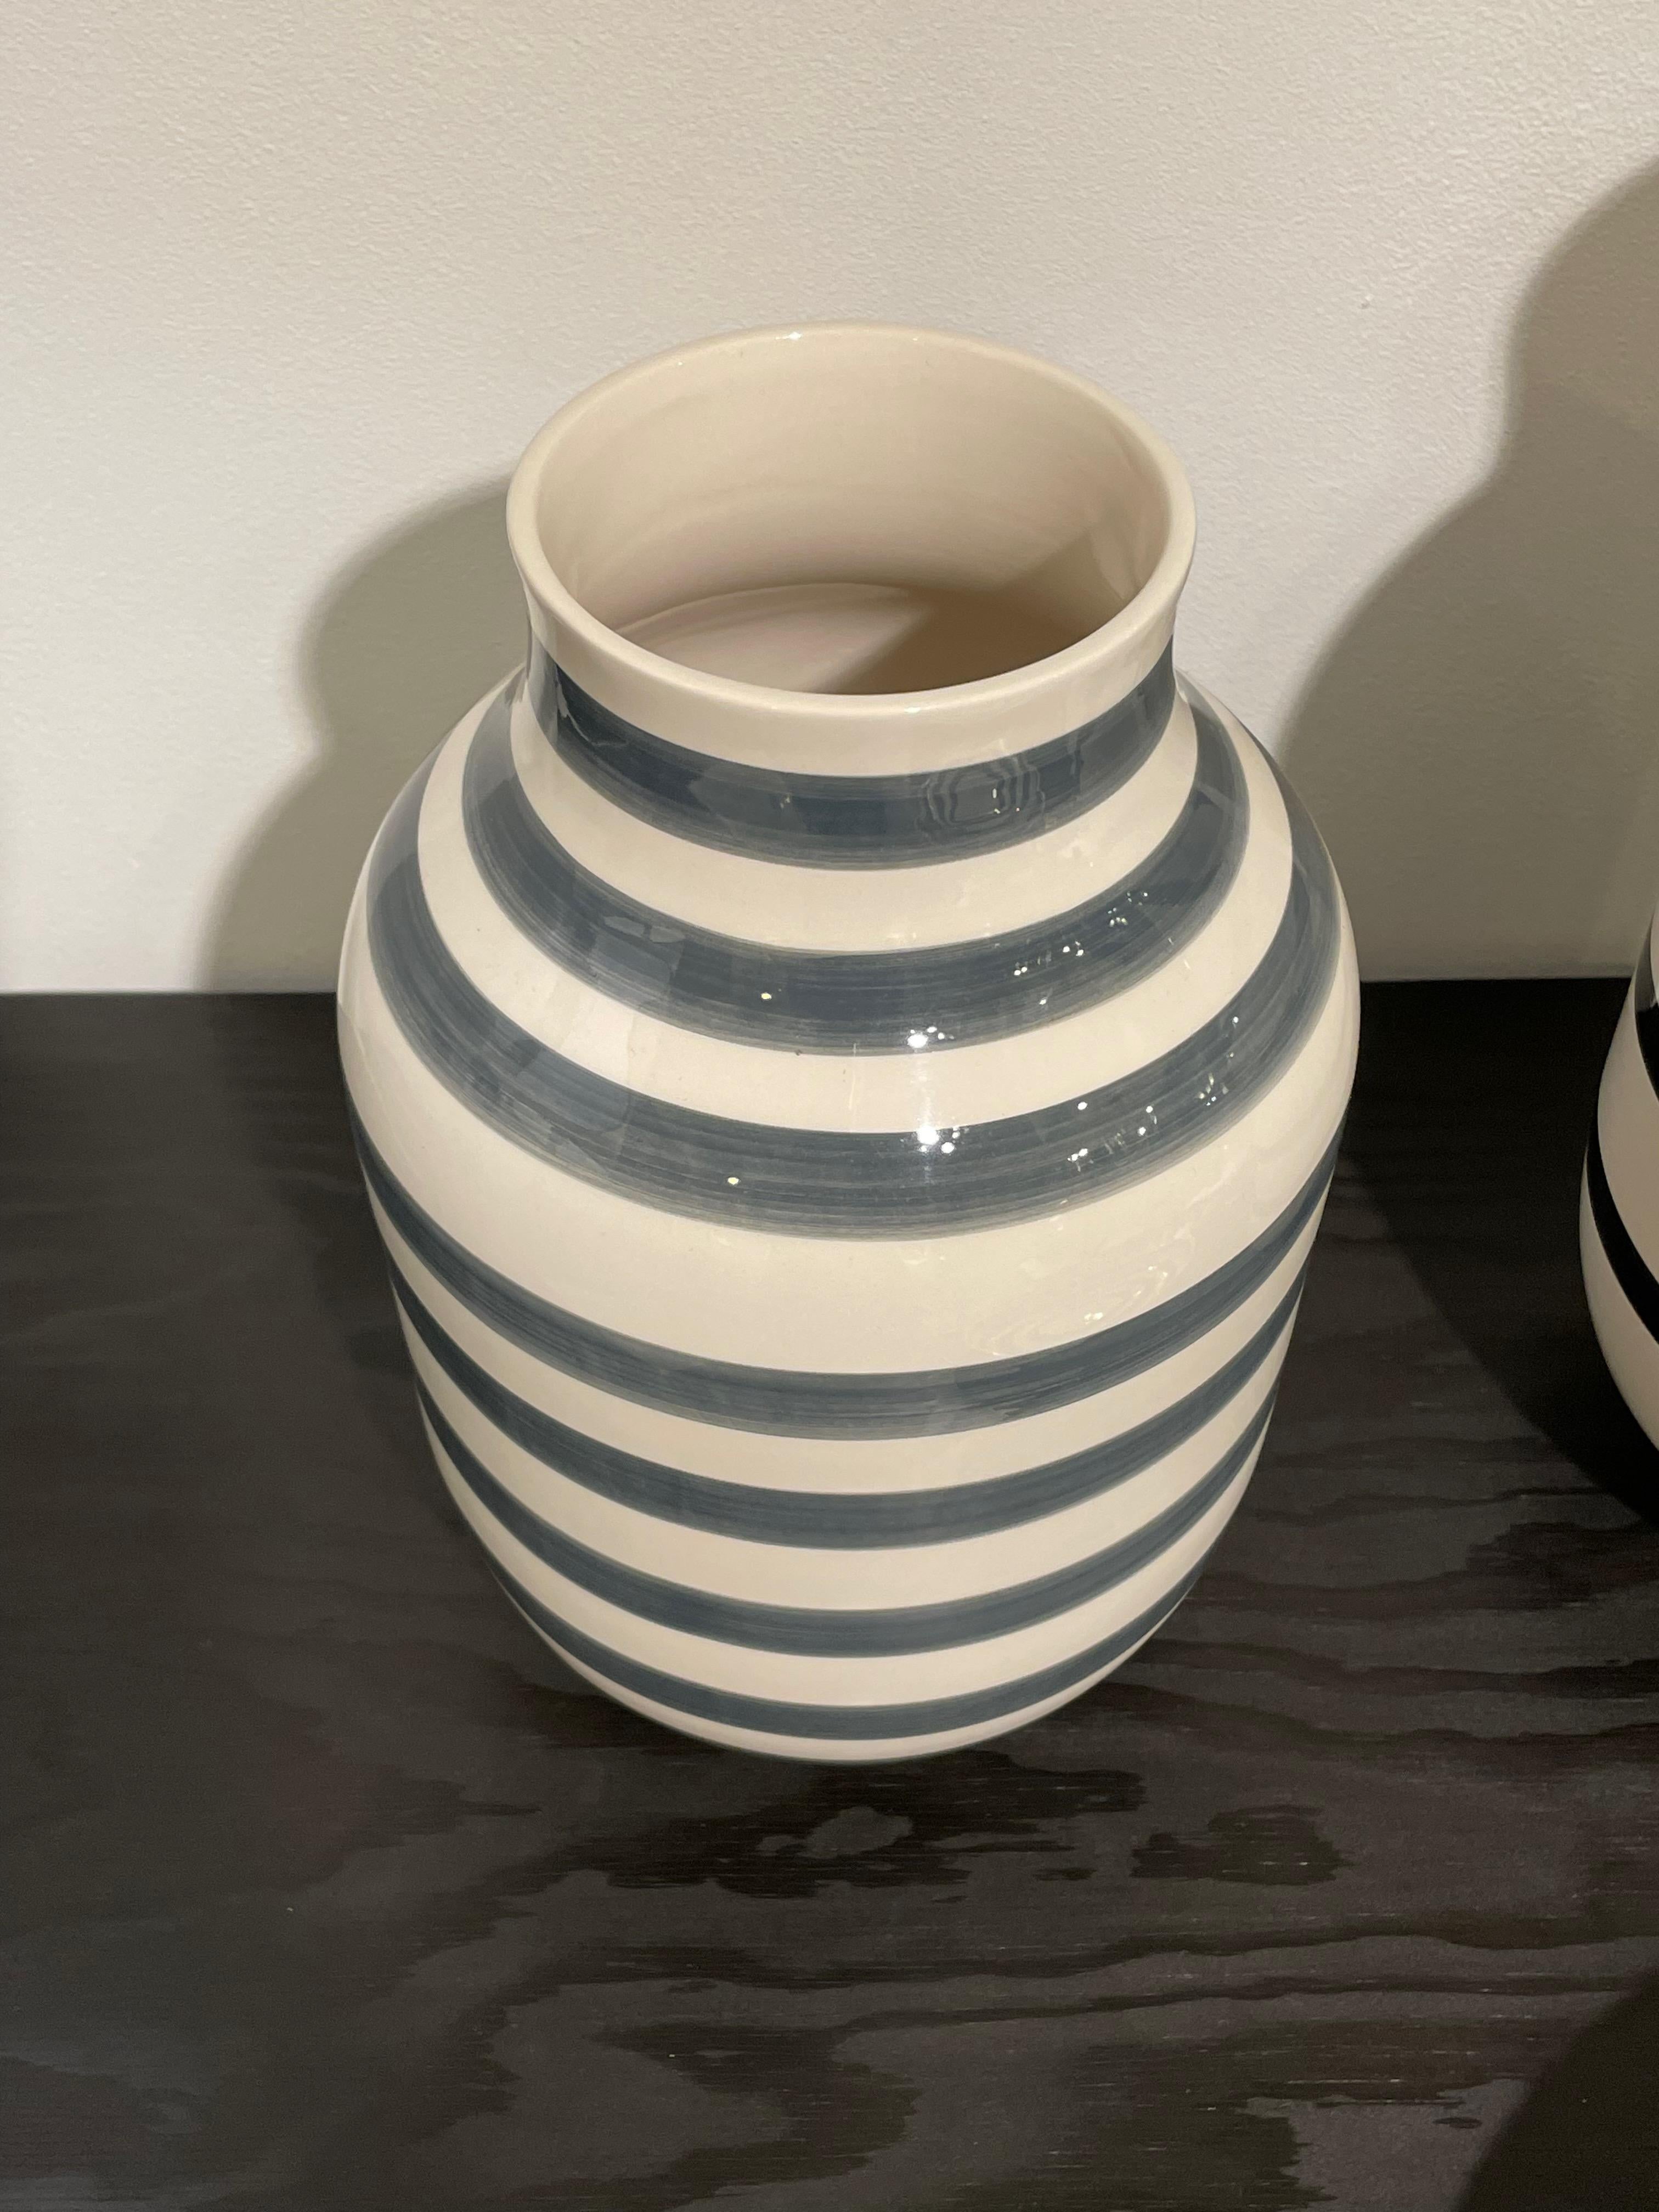 Mid century Danish horizontal stripe vase.
Cream ground with charcoal stripes.
Can hold water.
ARRIVING AUGUST